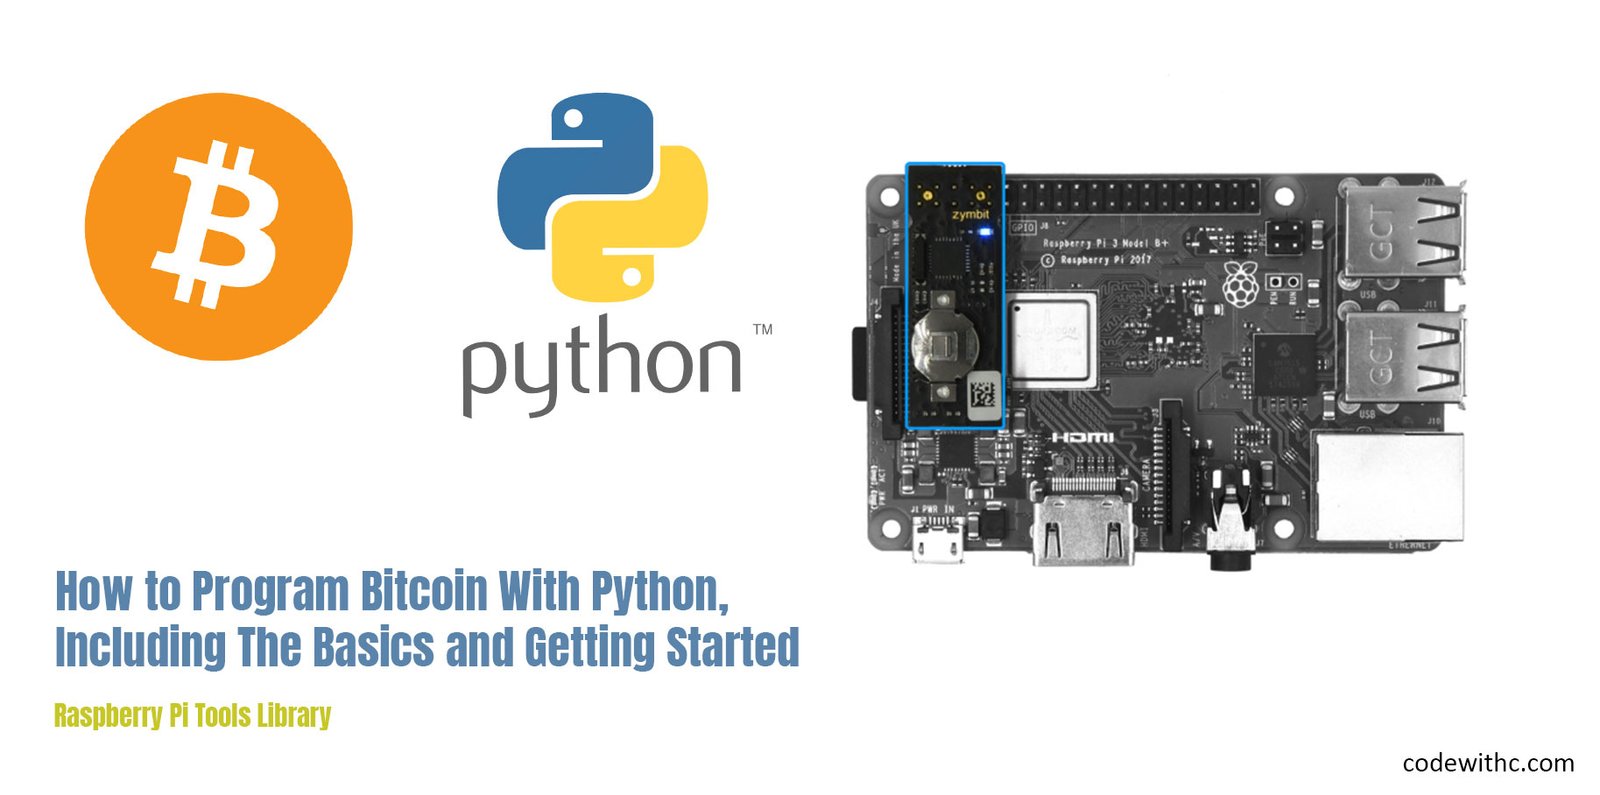 A from-scratch tour of Bitcoin in Python